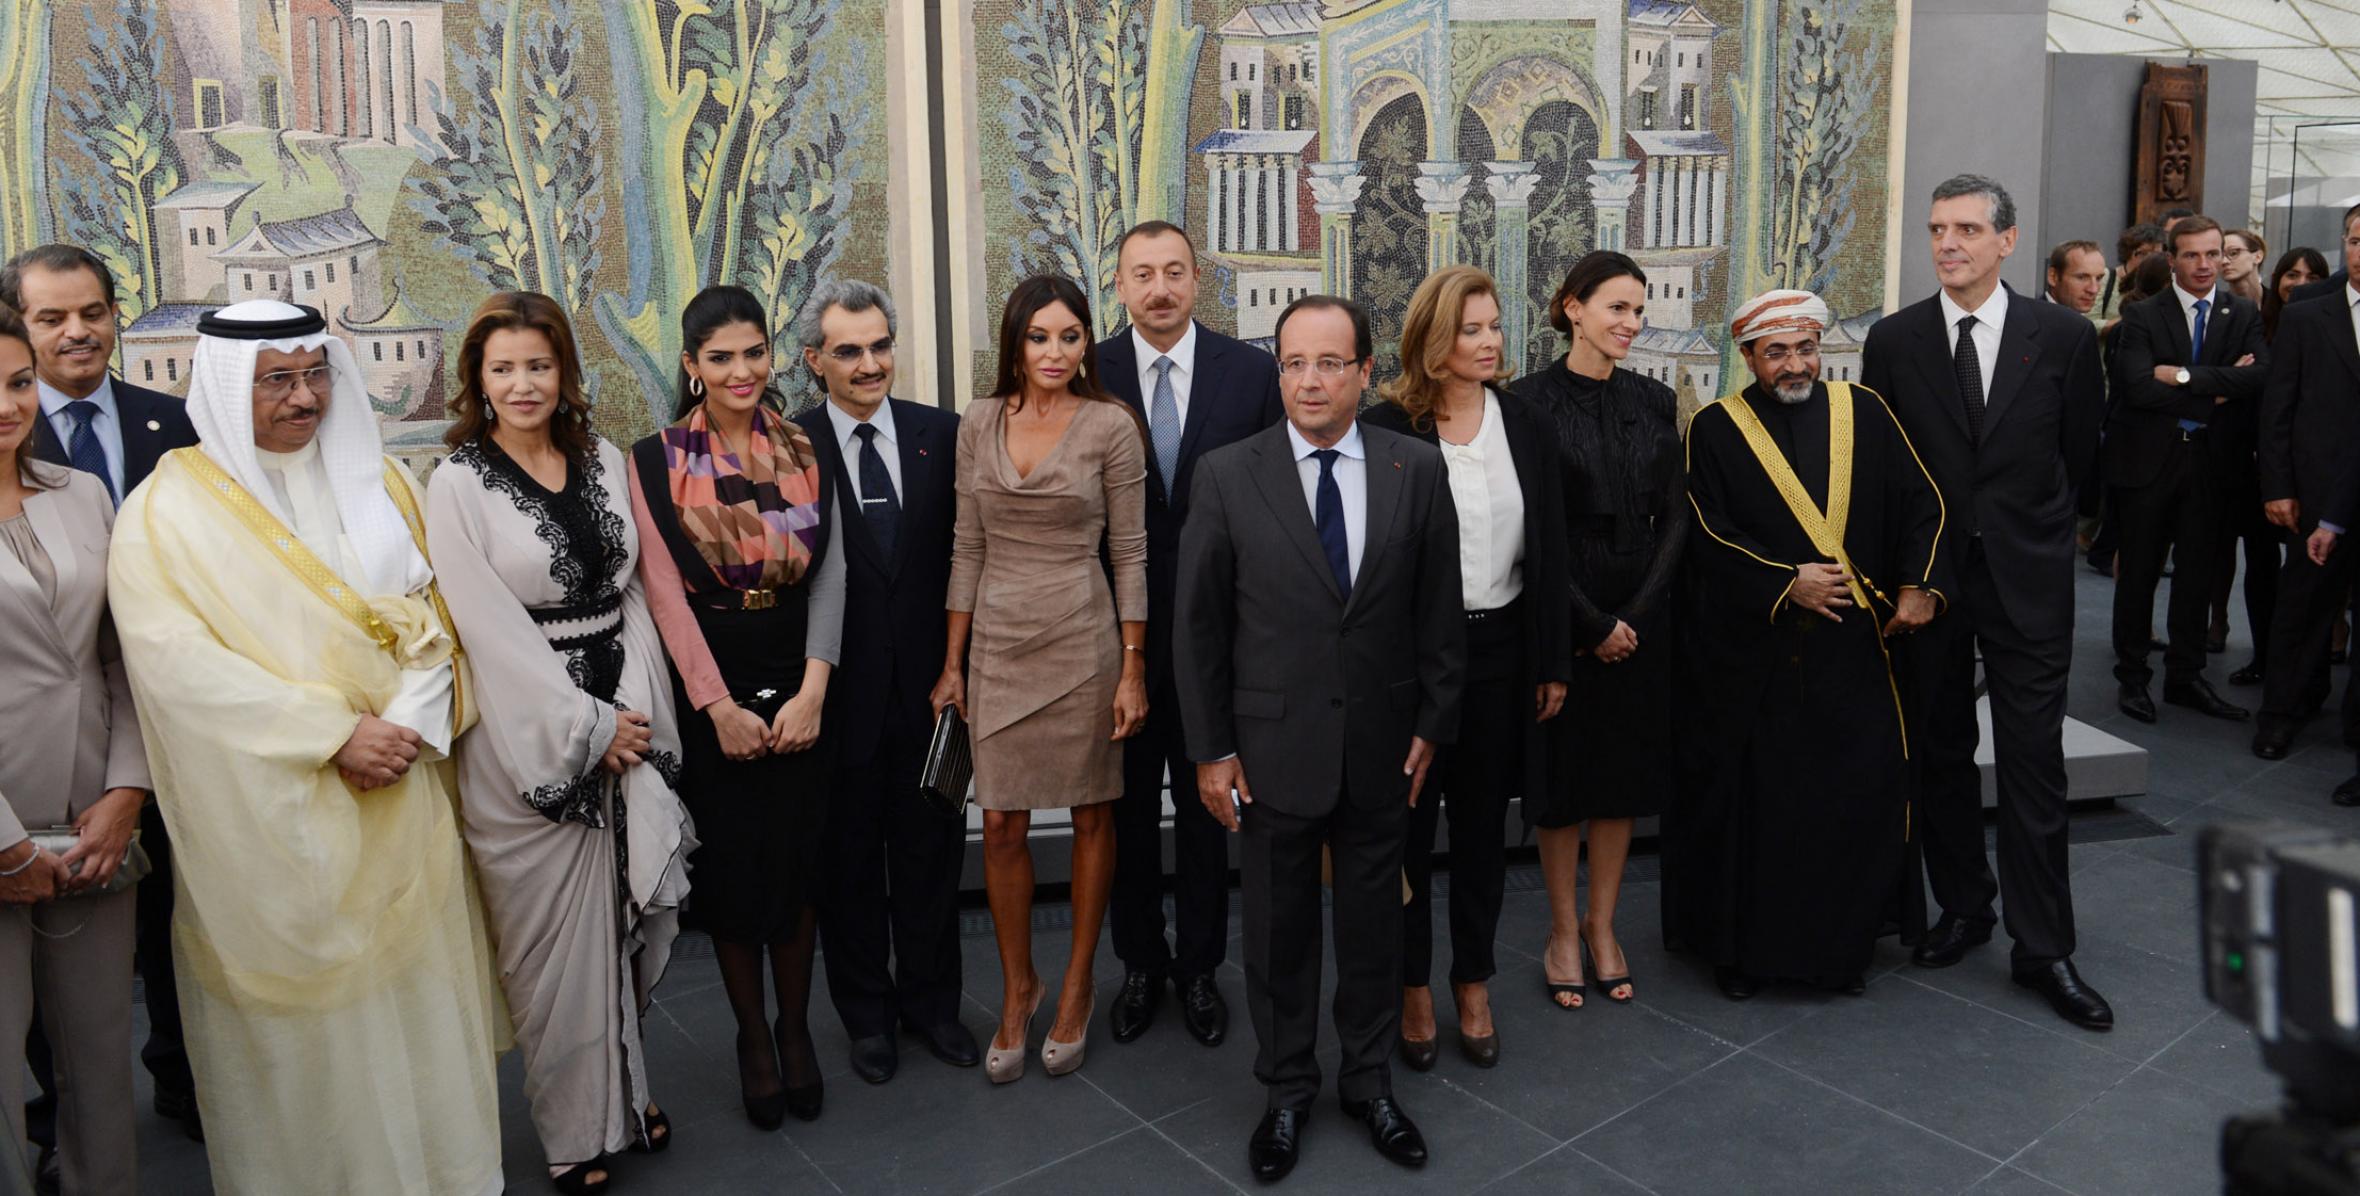 Ilham Aliyev attended the opening ceremony of new halls of the Paris Louvre museum dedicated to Islamic art